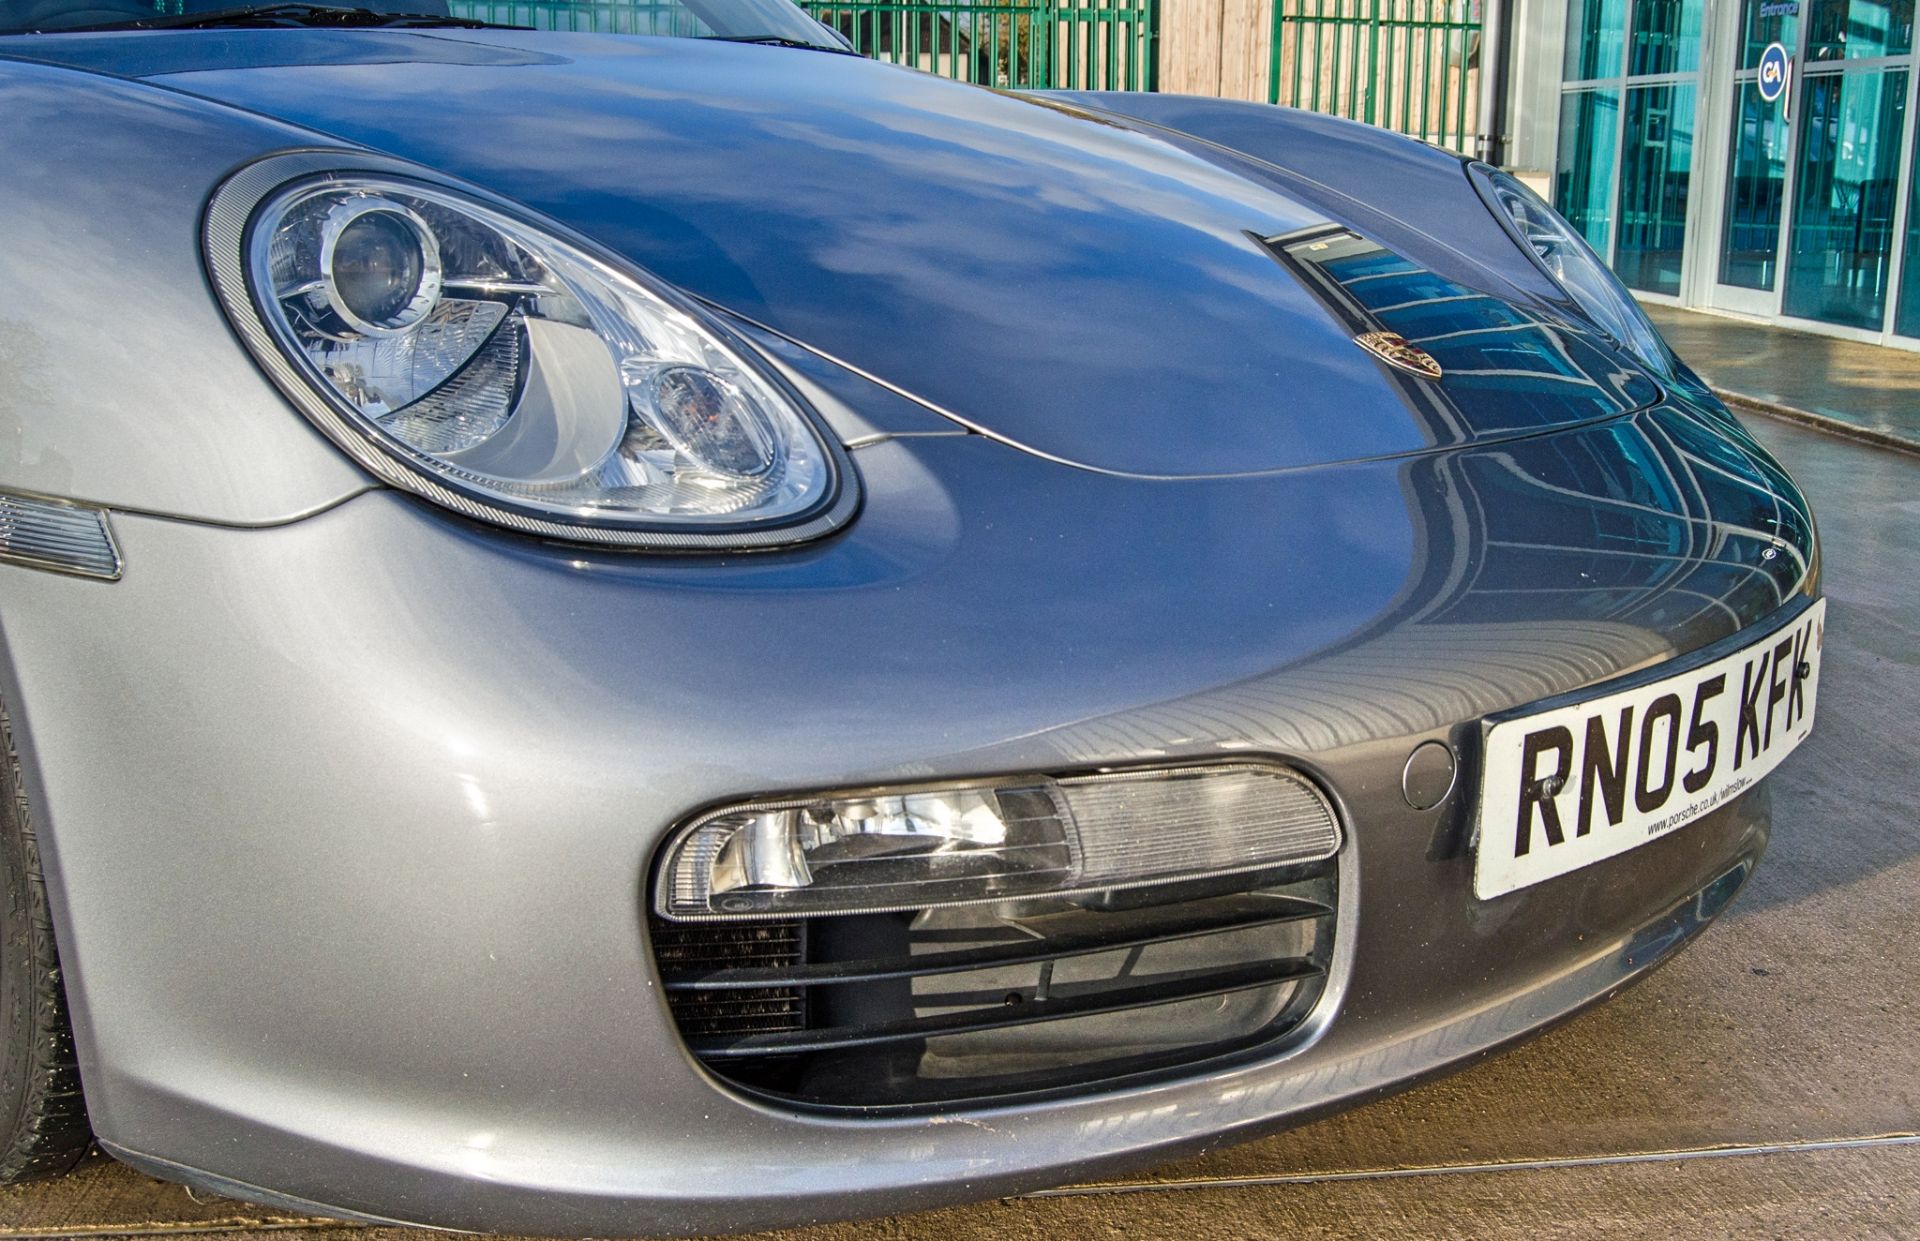 Porsche Boxster 2.7 litre 5 speed manual convertible roadster Registration Number: RN05 KFK Date - Image 13 of 45